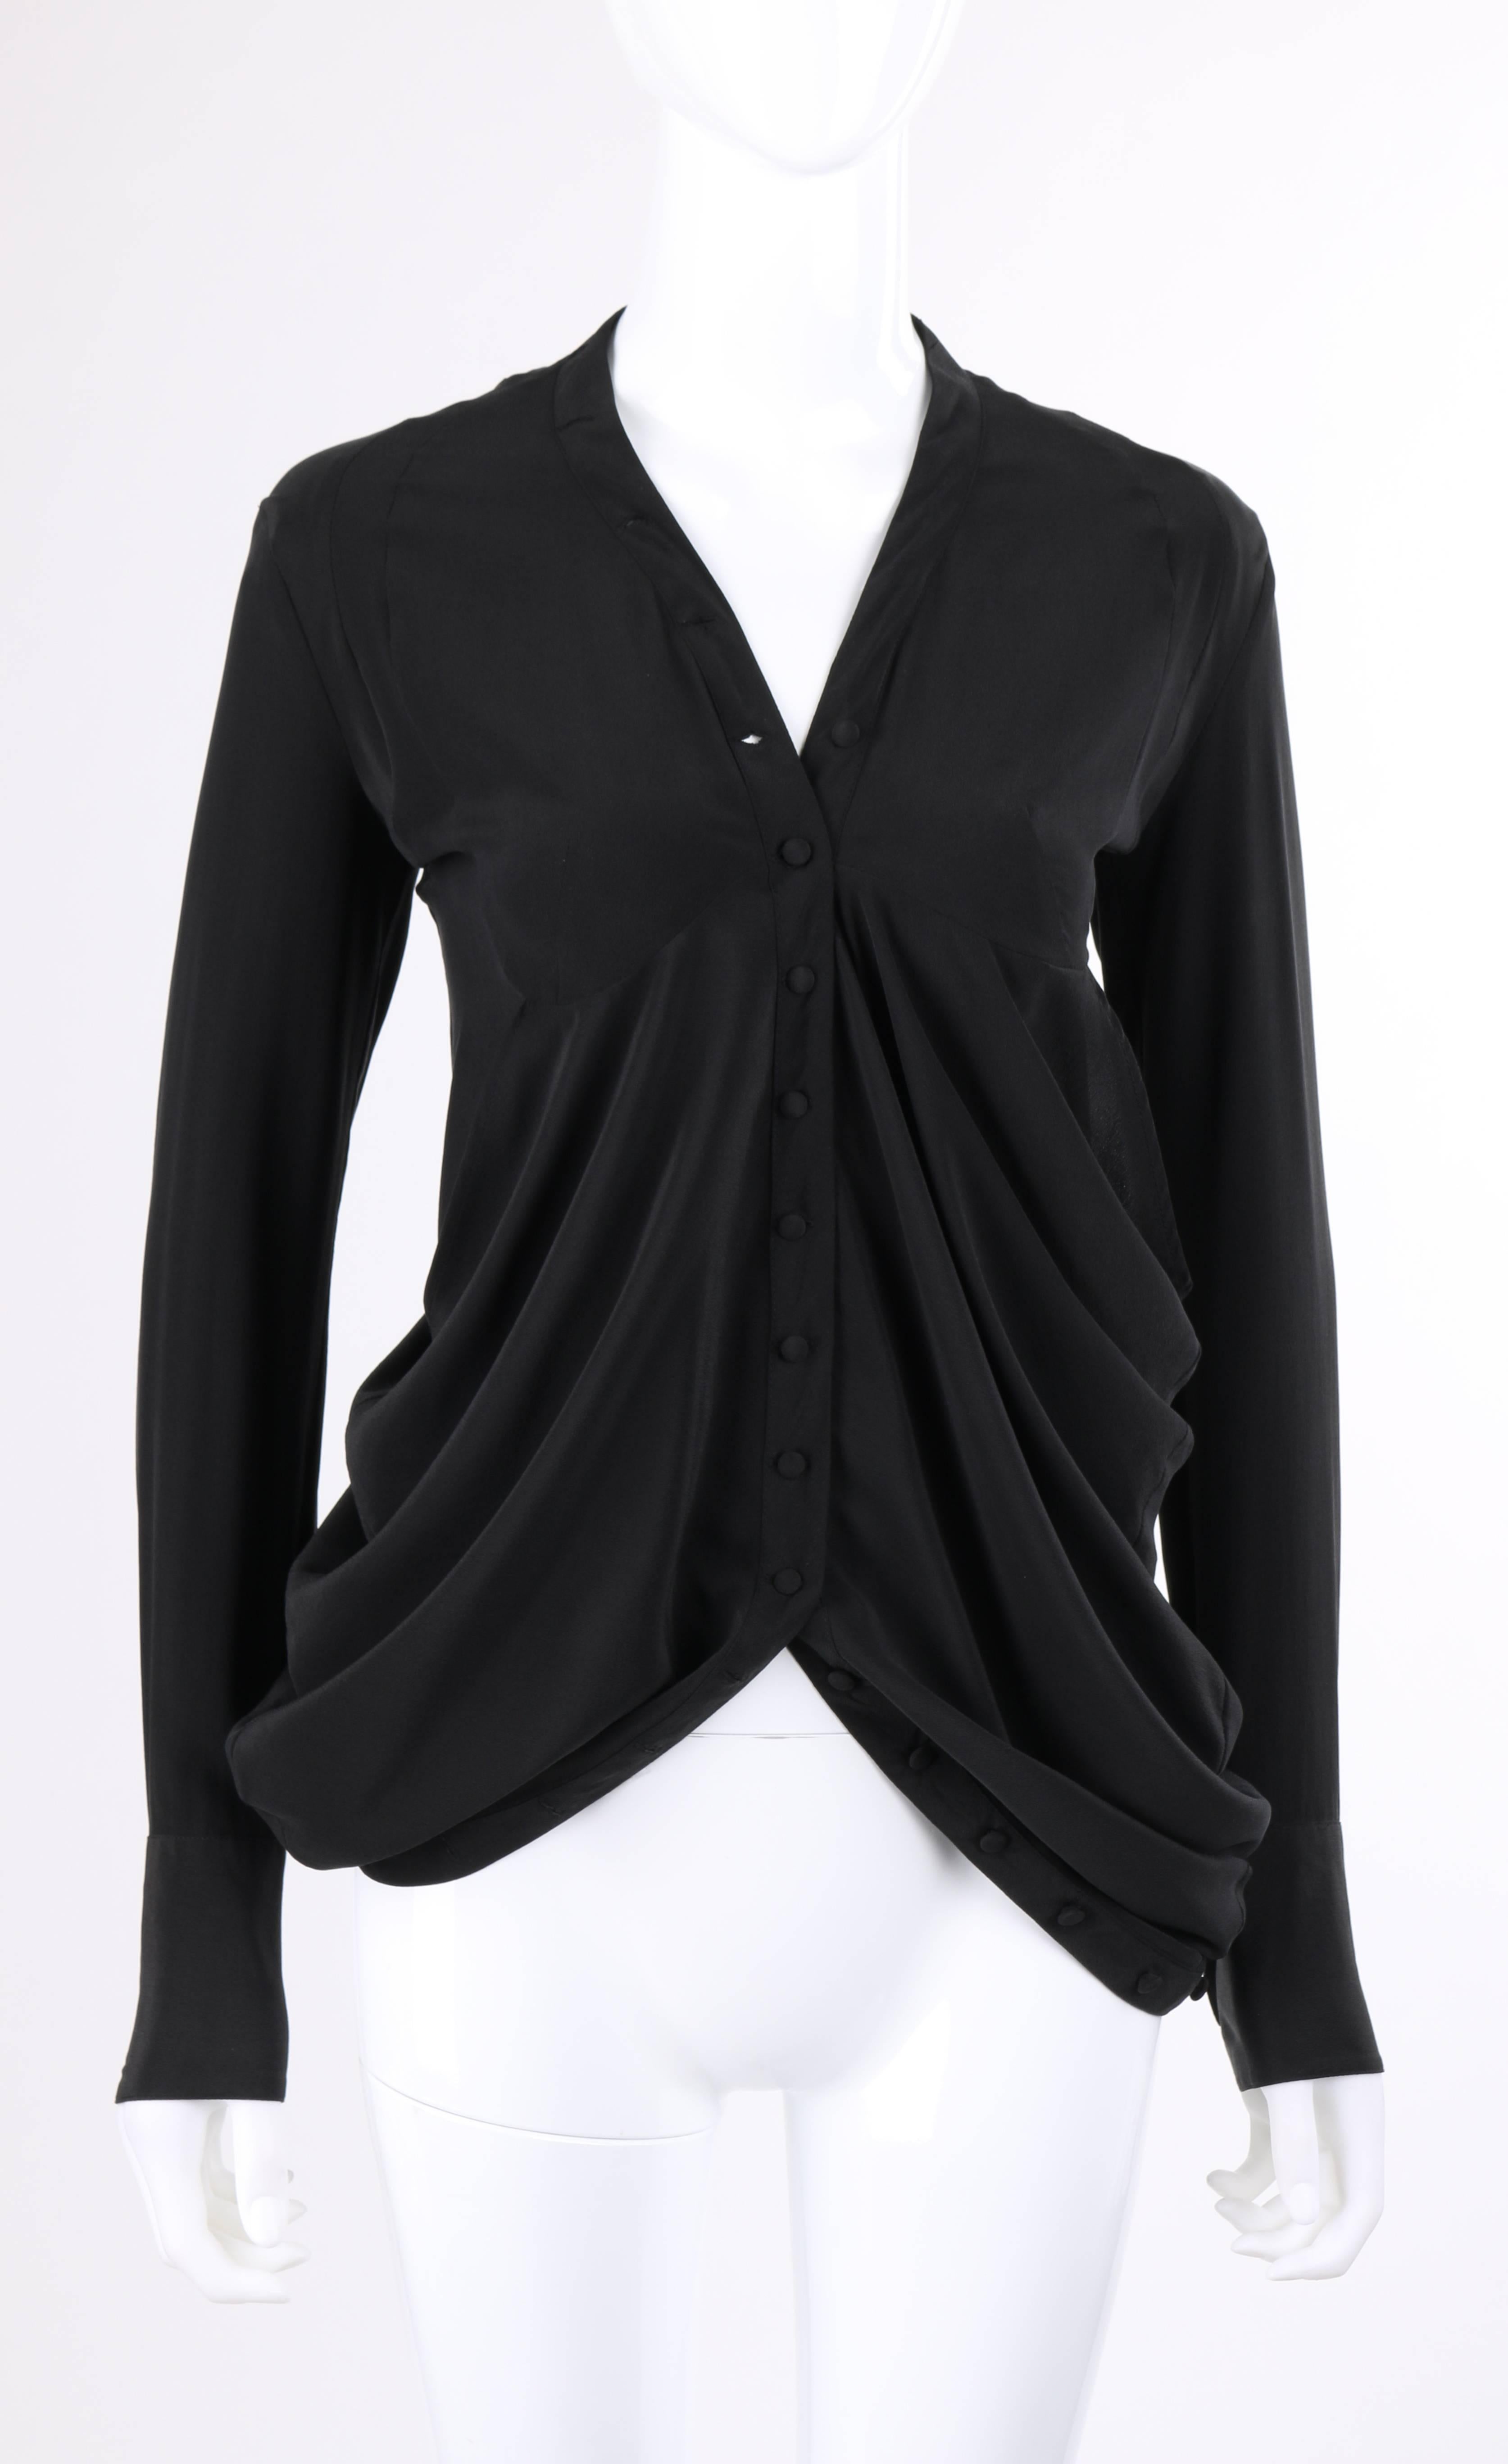 Balenciaga Autumn/Winter 2009 black silk blend asymmetrical draped blouse. Long sleeves with two button closures at cuff. V-neckline. Twenty three center front covered button closures. Stylized rounded under bust seam. Two bias cut asymmetrical